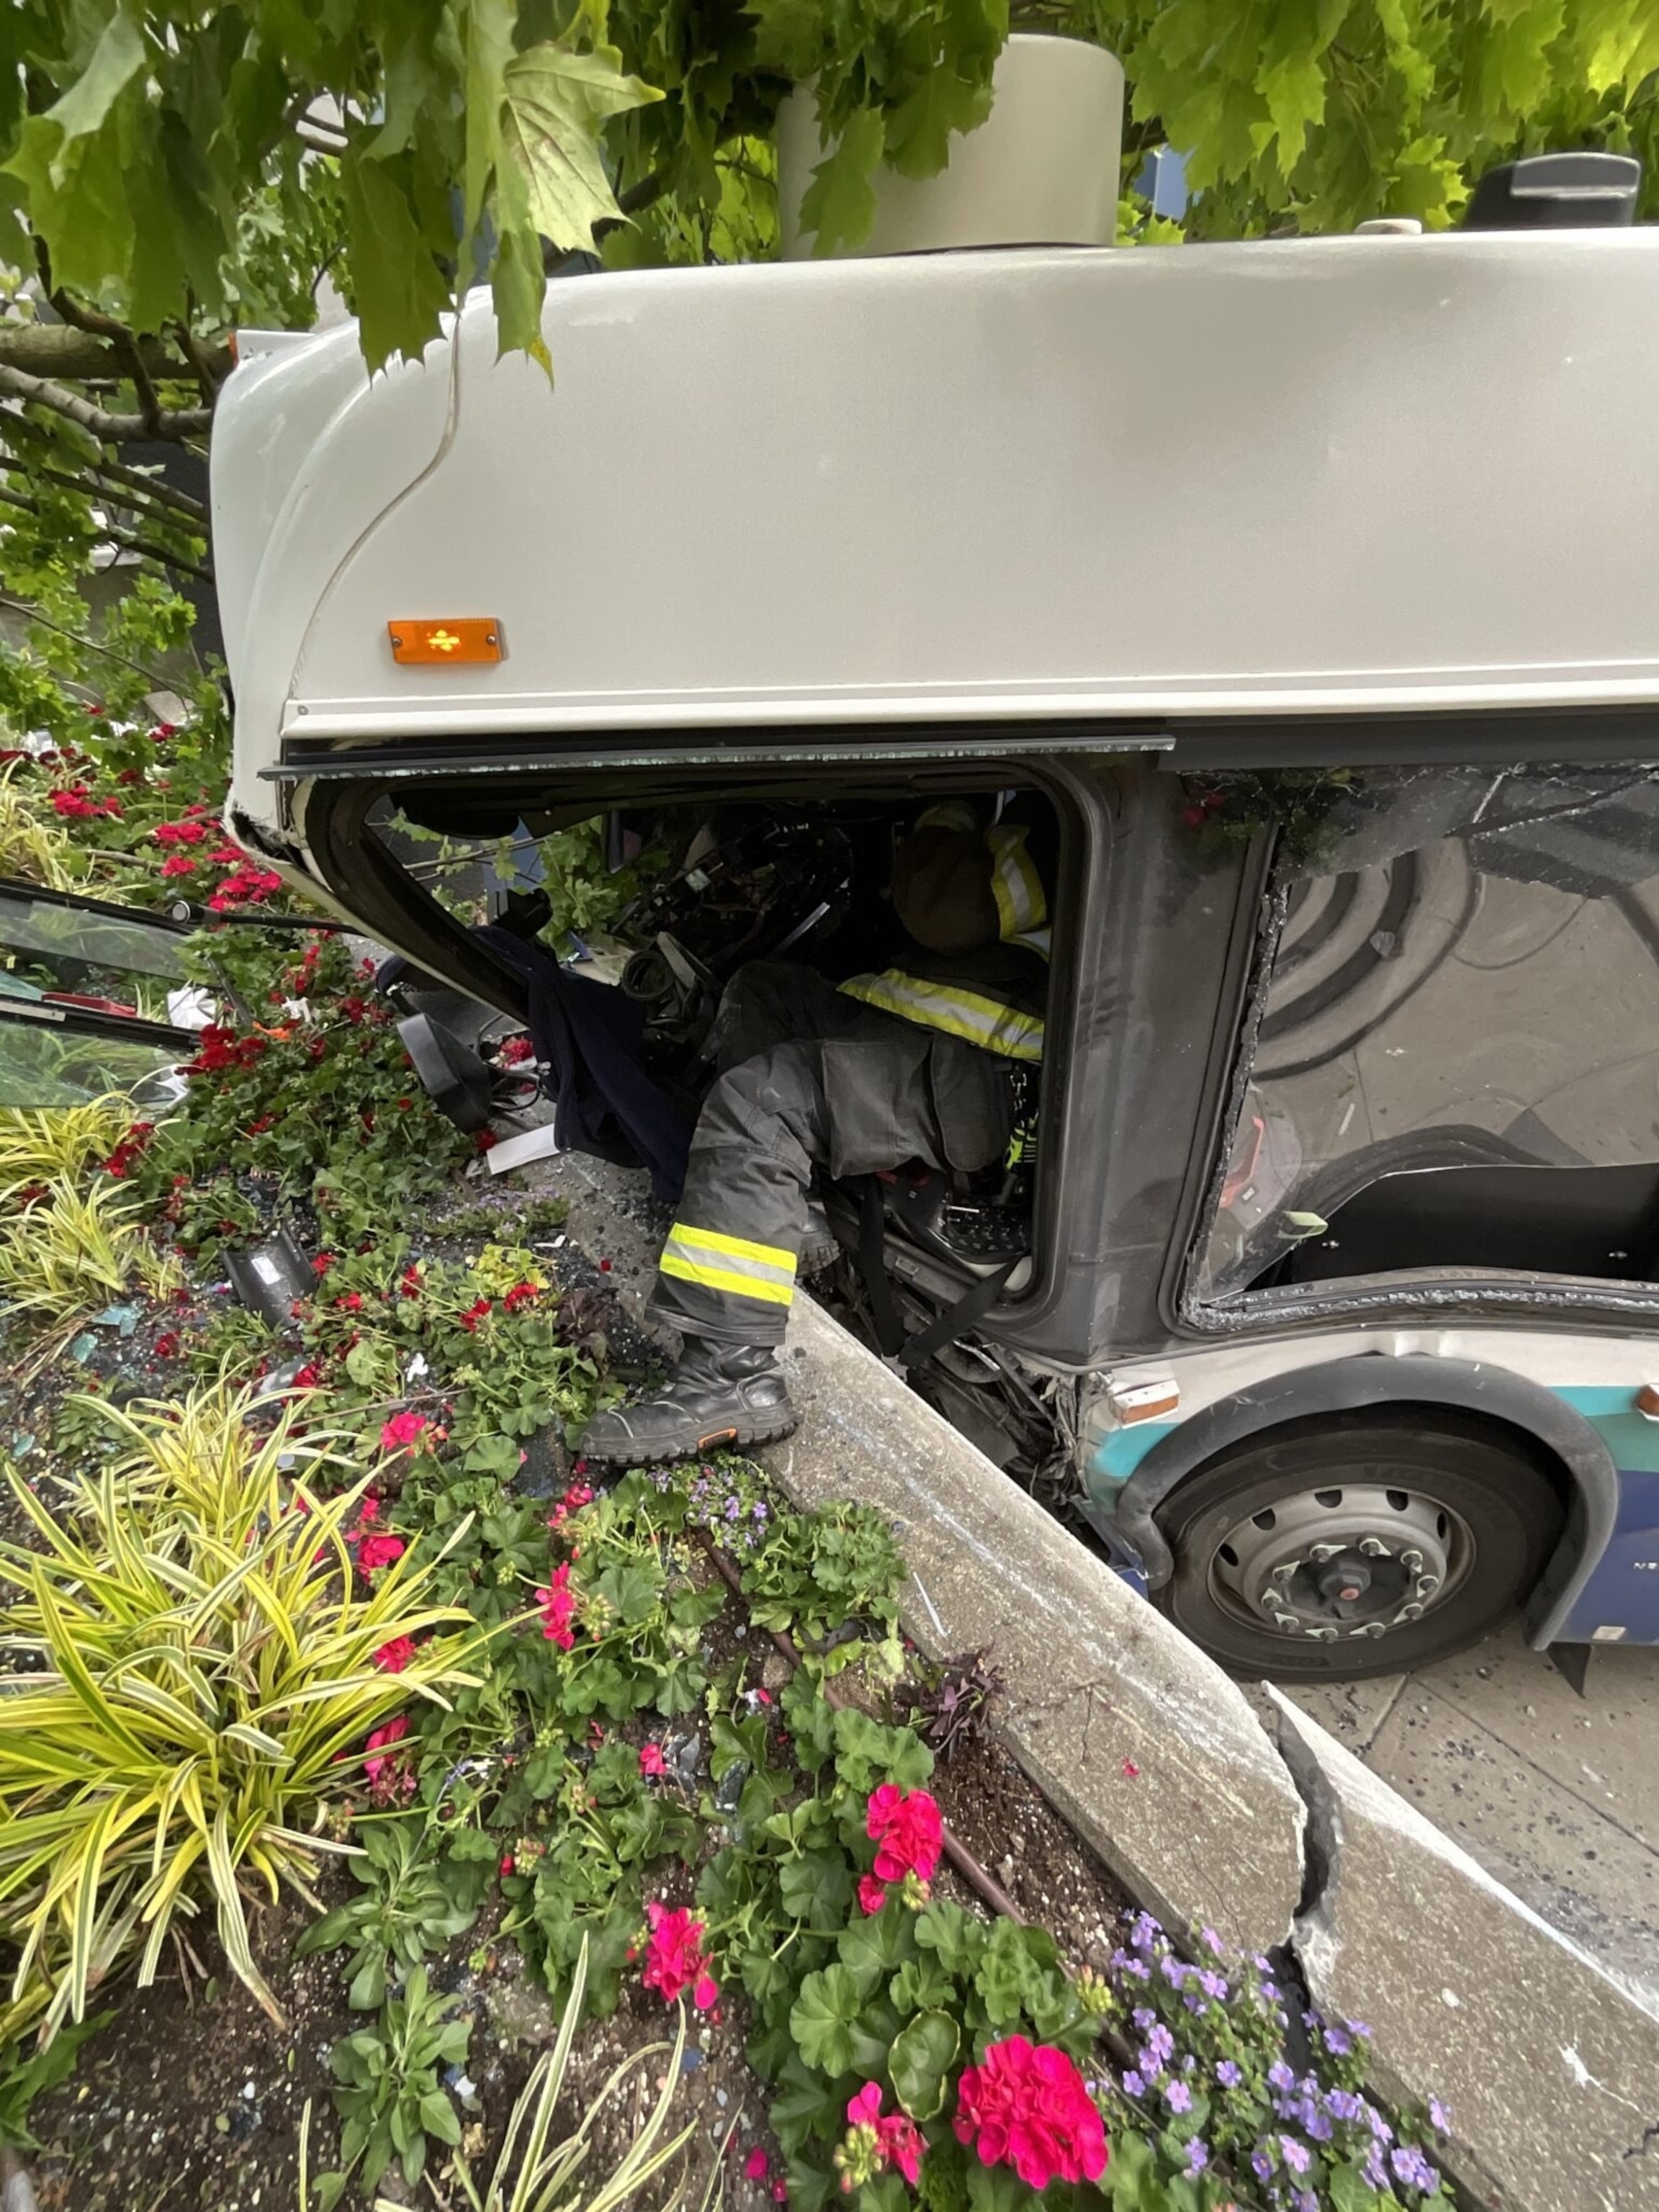 PHOTO: A Sound Transit public bus is seen in this photo after crashing on Saturday, June 22, 2024, into a building in downtown Seattle, Washington.